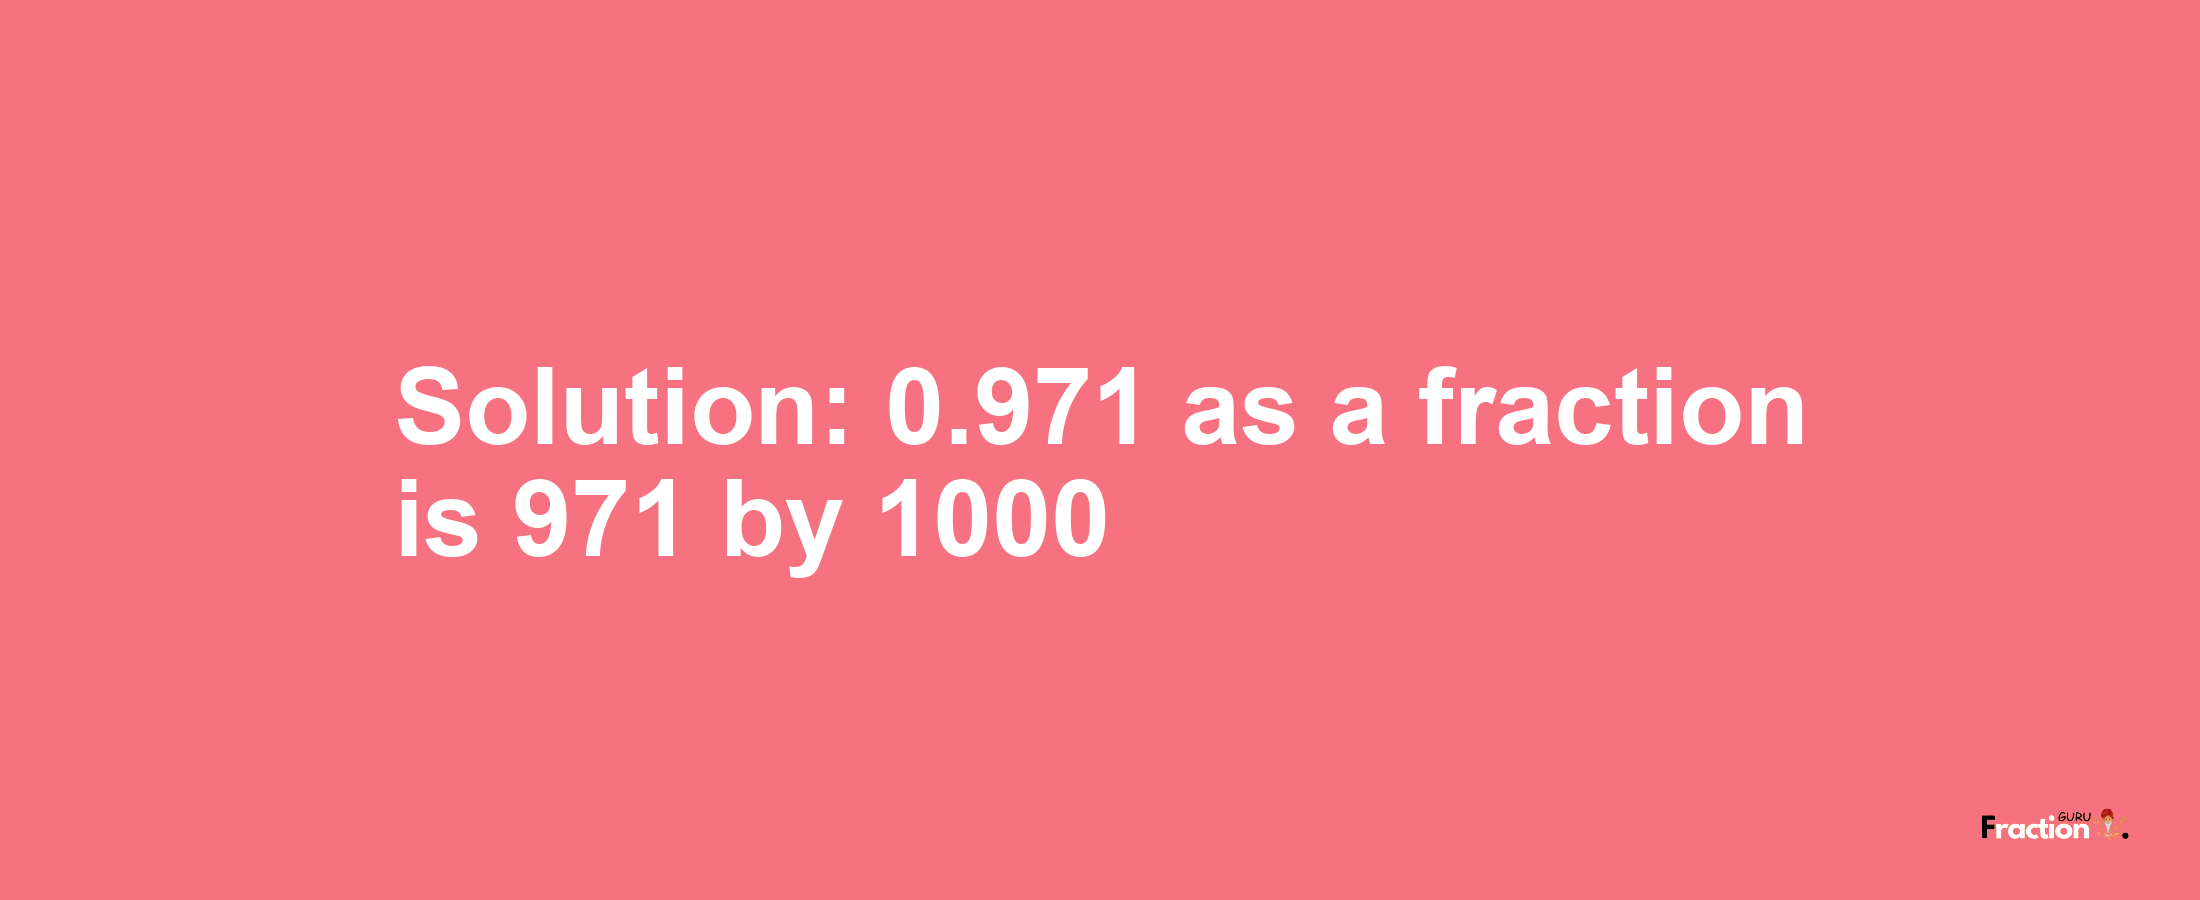 Solution:0.971 as a fraction is 971/1000